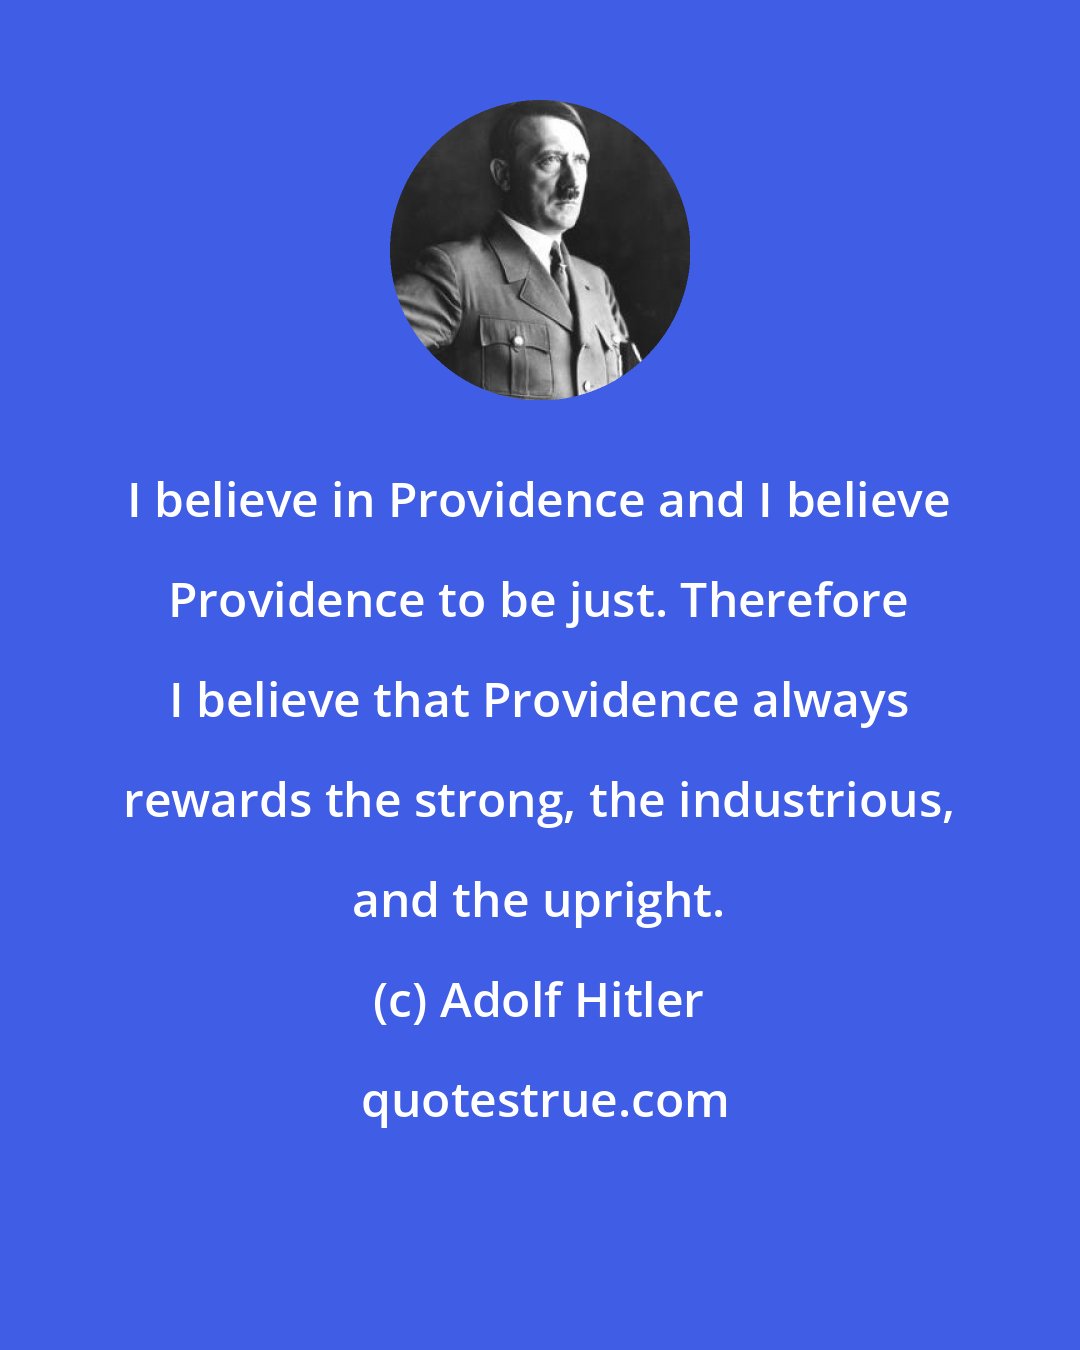 Adolf Hitler: I believe in Providence and I believe Providence to be just. Therefore I believe that Providence always rewards the strong, the industrious, and the upright.